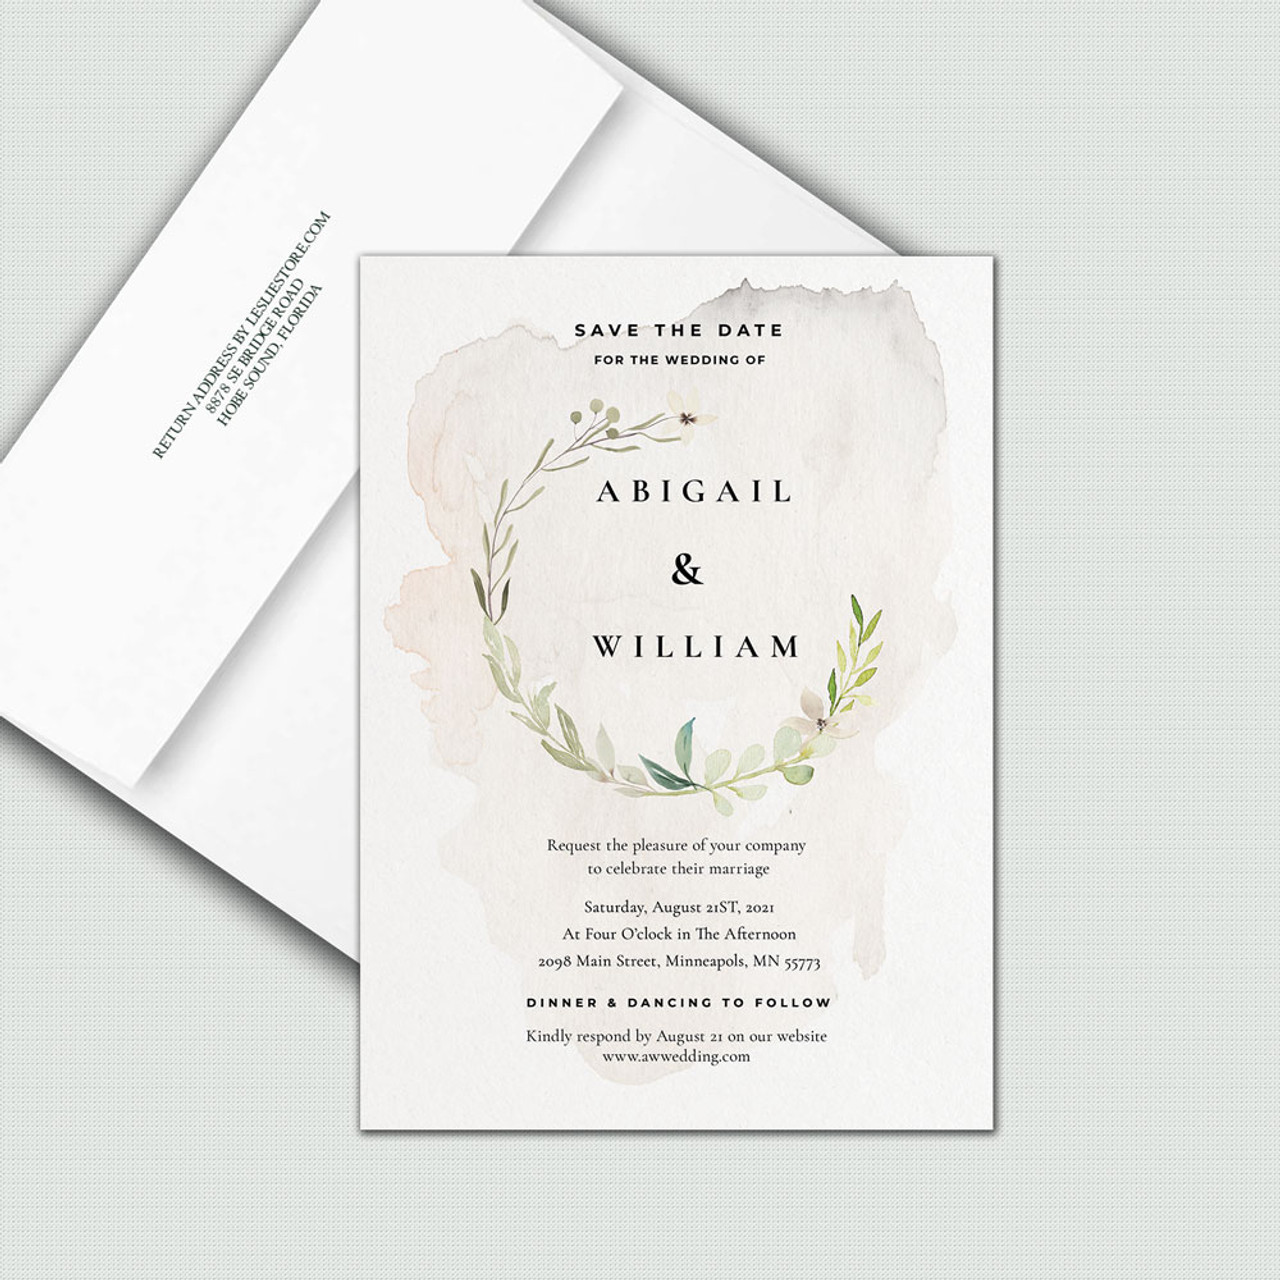 Abigail Save the Date Cards, Wedding Suite